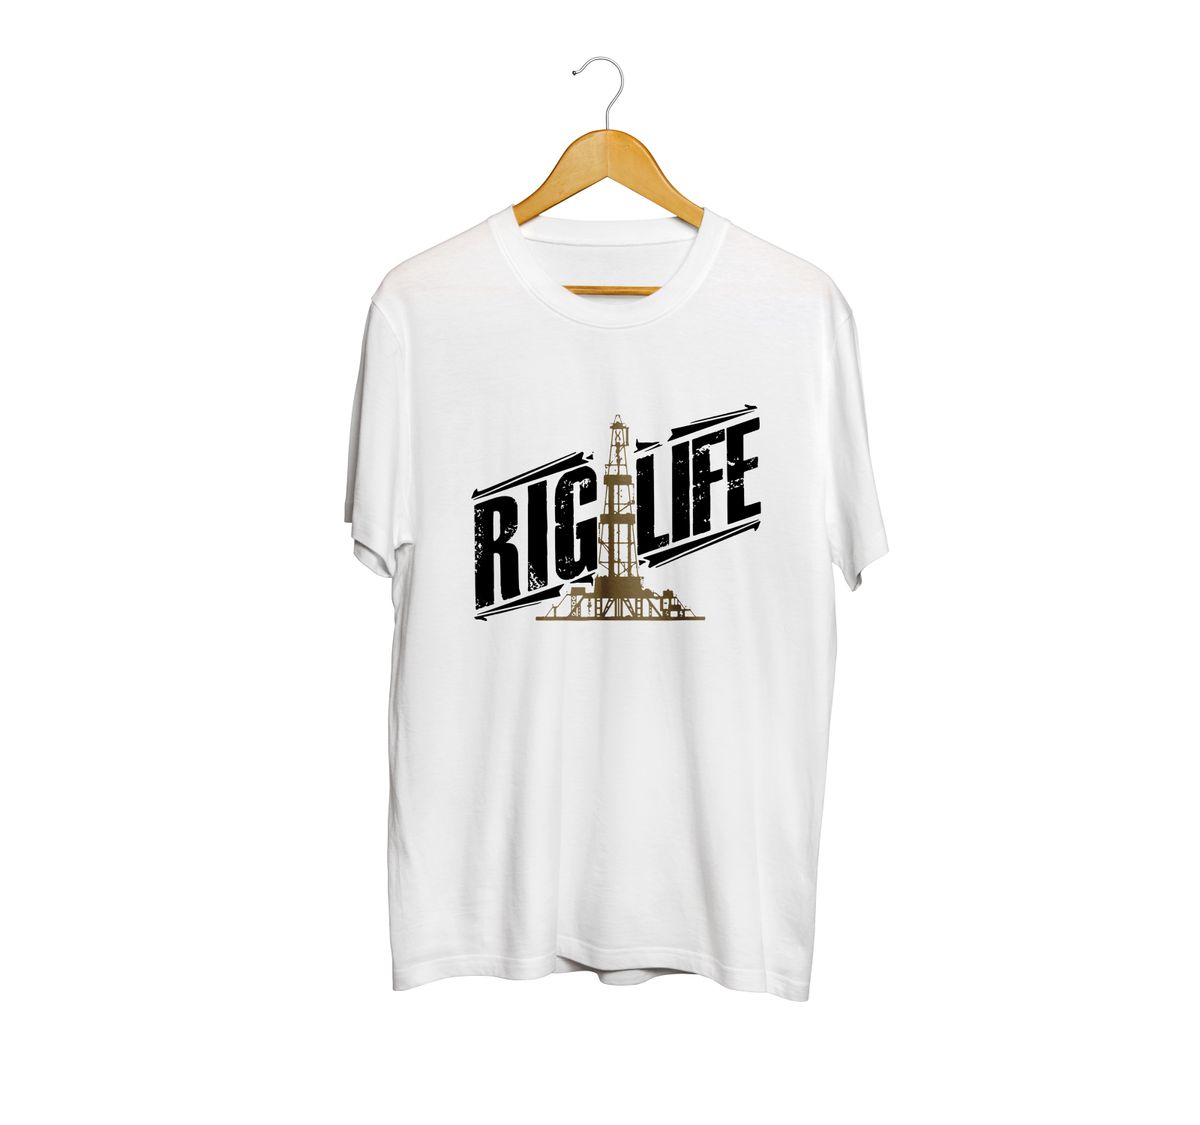 The Drillers Club White Life T-Shirt image 1